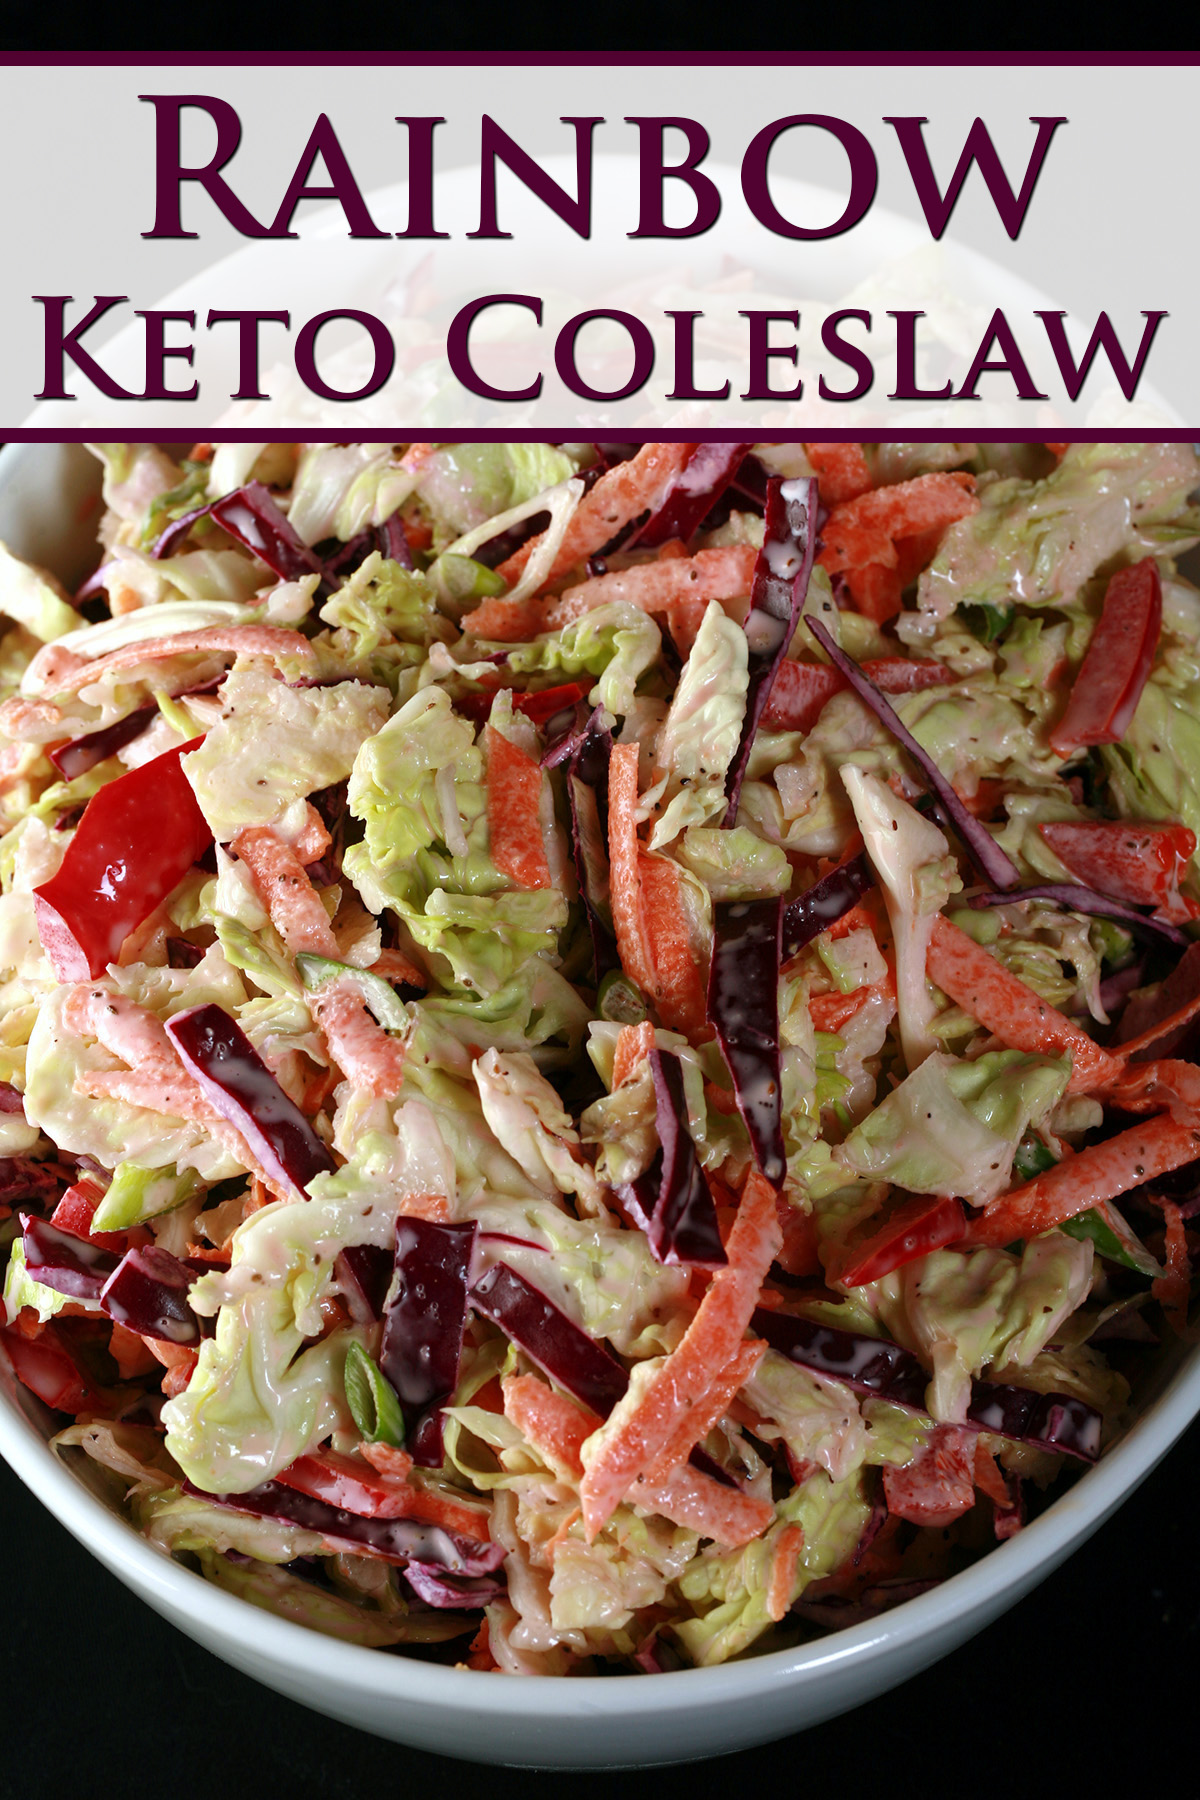 A bowl of colorful keto coleslaw.